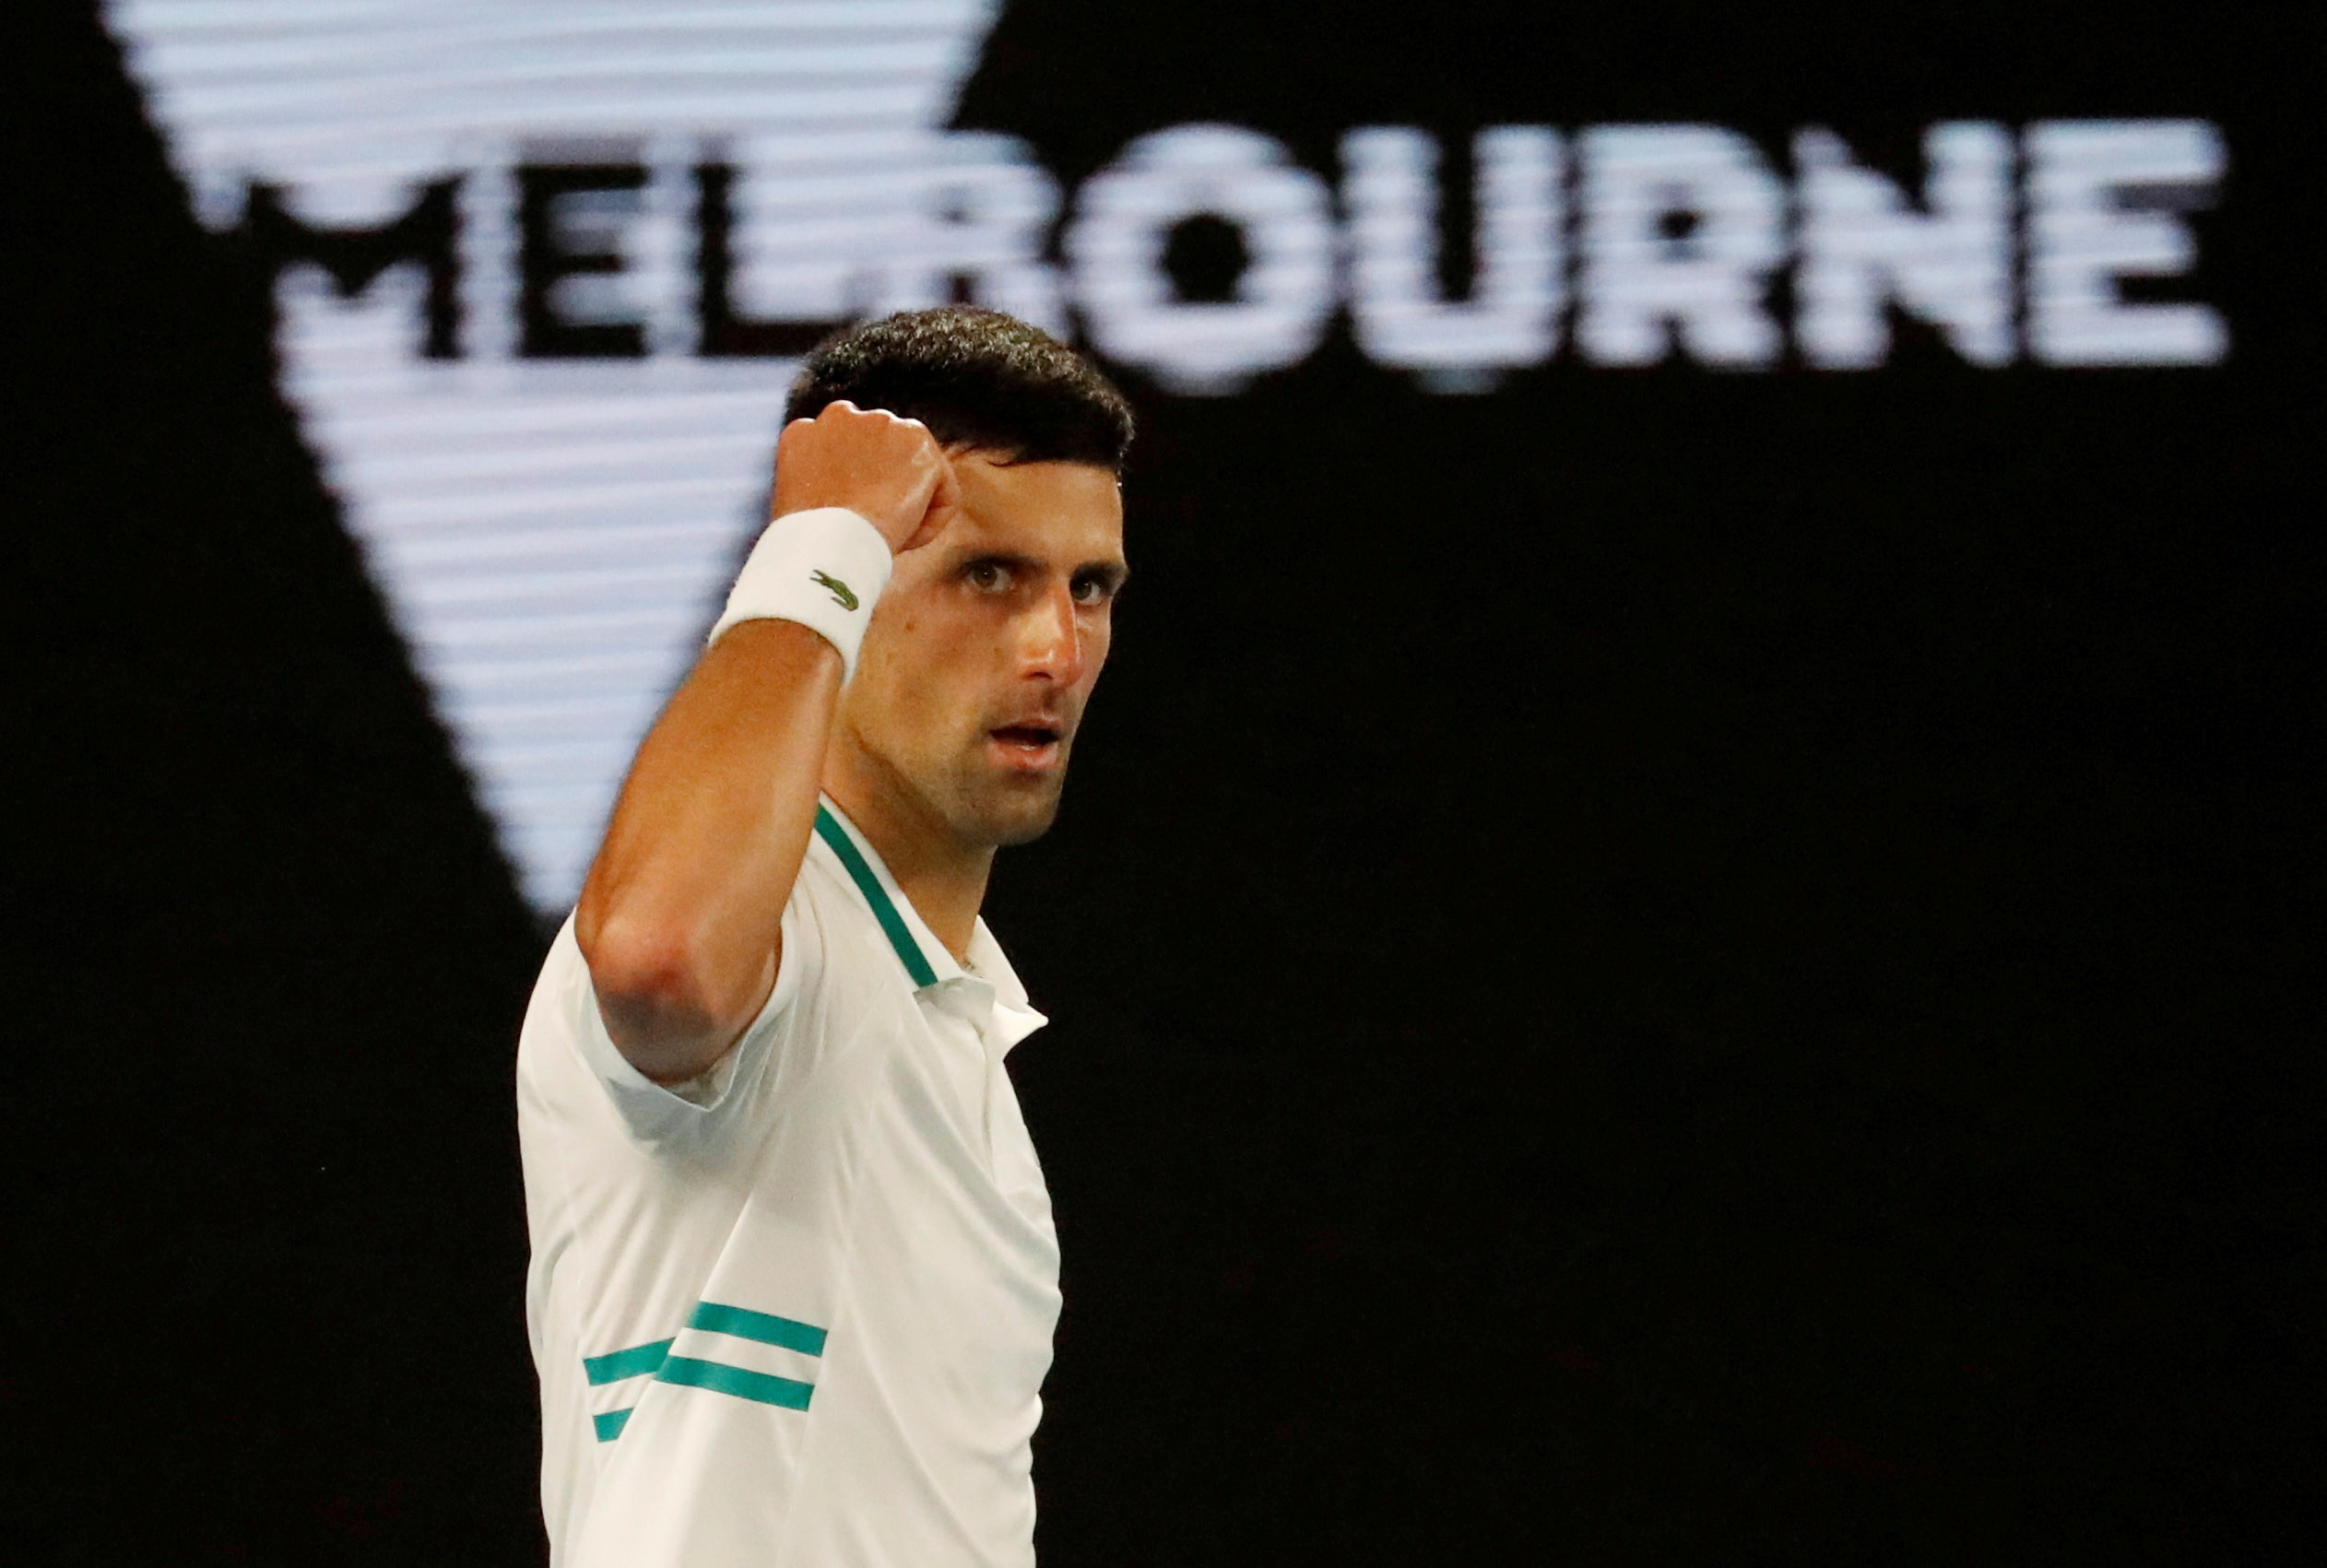 Serbia's Novak Djokovic reacts during his final match against Russia's Daniil Medvedev at the Australian Open